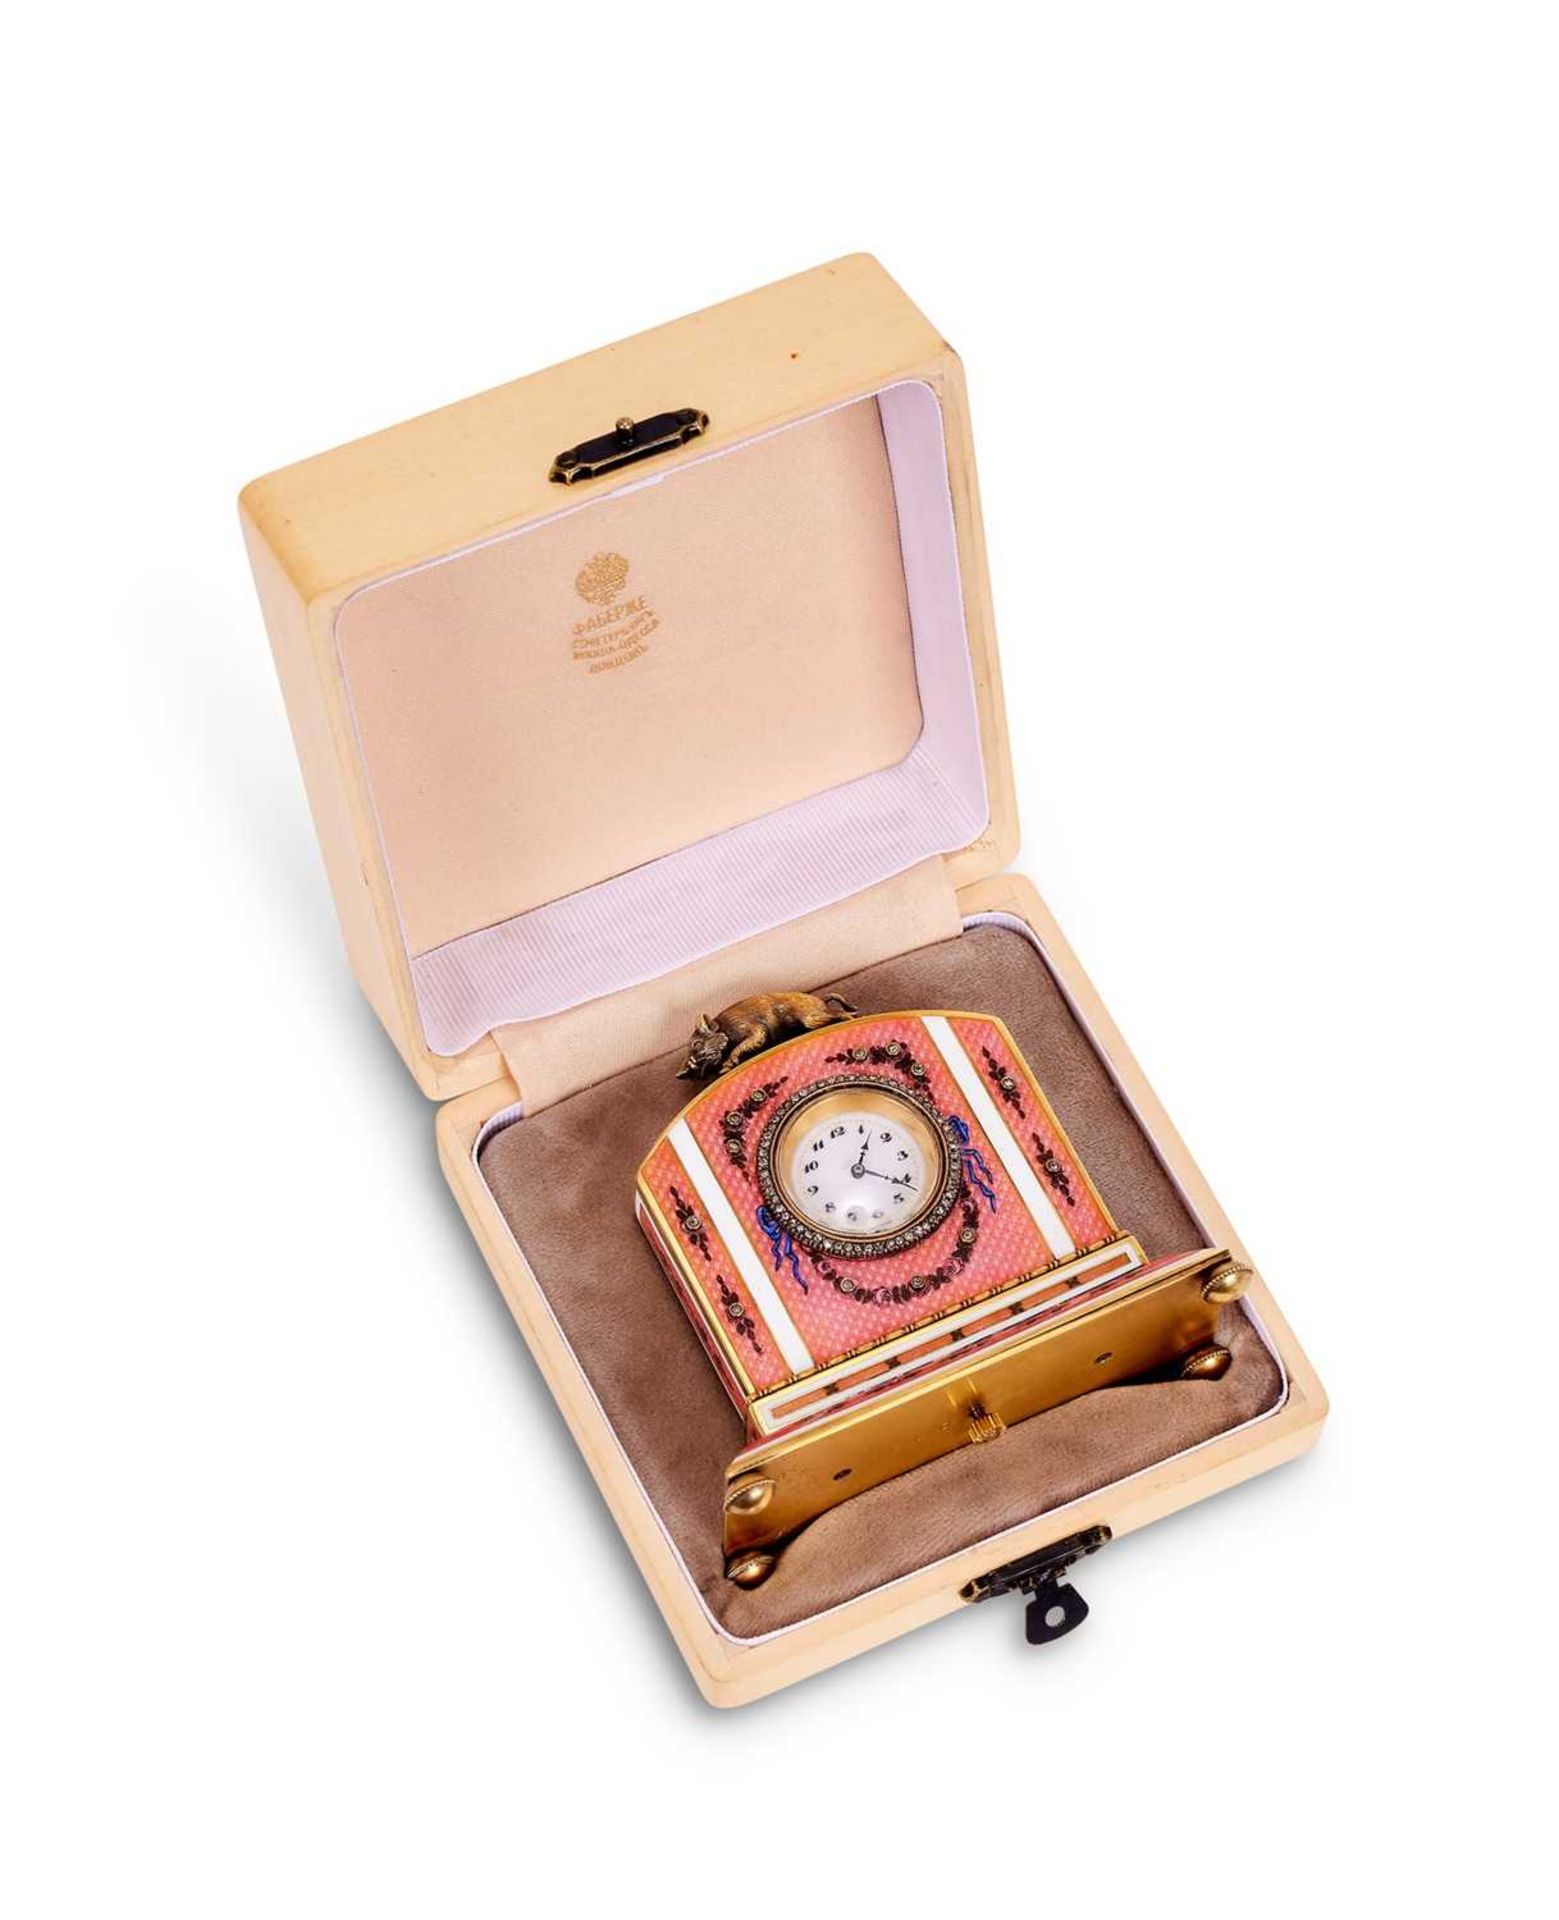 A FABERGE STYLE DIAMOND SET, GUILLOCHE ENAMEL AND SILVER GILT TRAVELLING CLOCK - Image 3 of 3